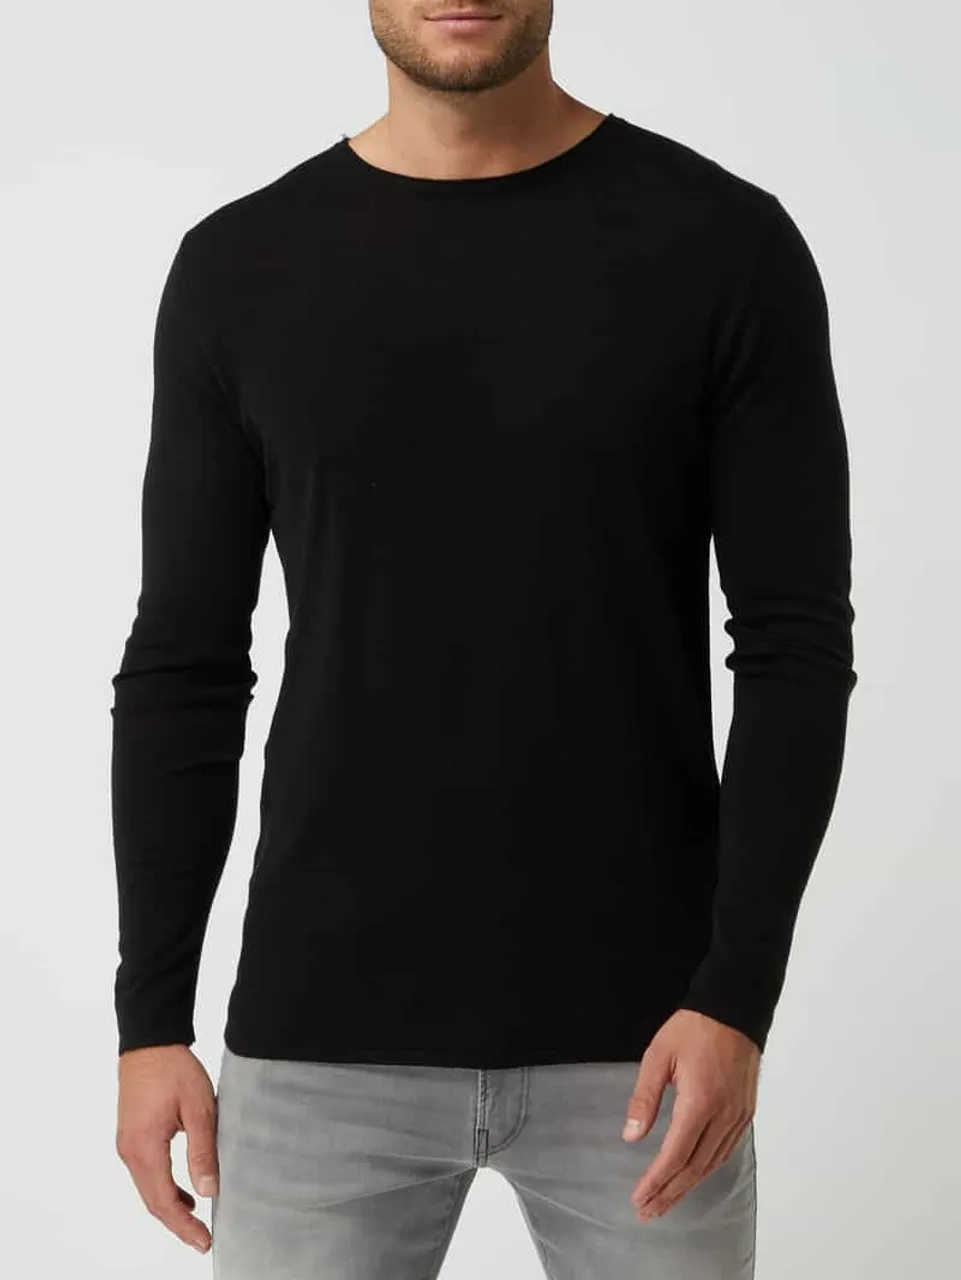 SELECTED HOMME Pullover aus Bio-Baumwolle und Lyocell Modell 'Rome' in Black